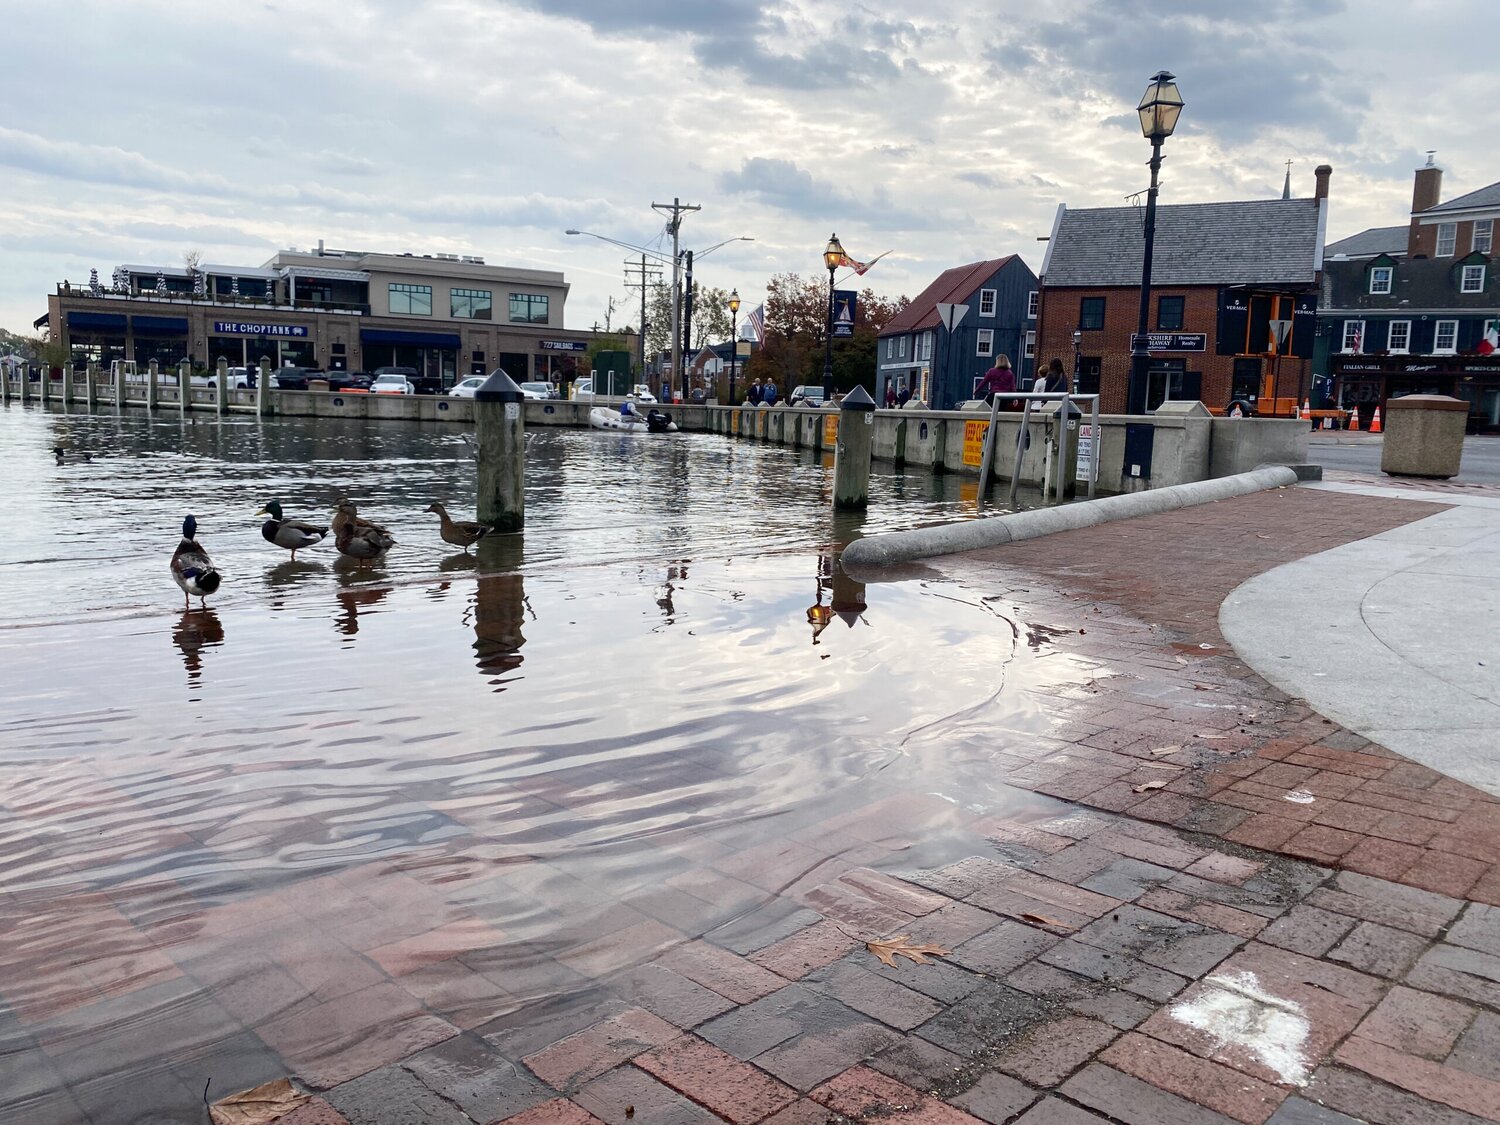 Ducks stand on the edge of Annapolis, Maryland's City Dock, as water overflows onto the walkway. The City Dock resilience plan includes physical barriers along Ego Alley, which some environmentalists say could negatively impact wildlife.